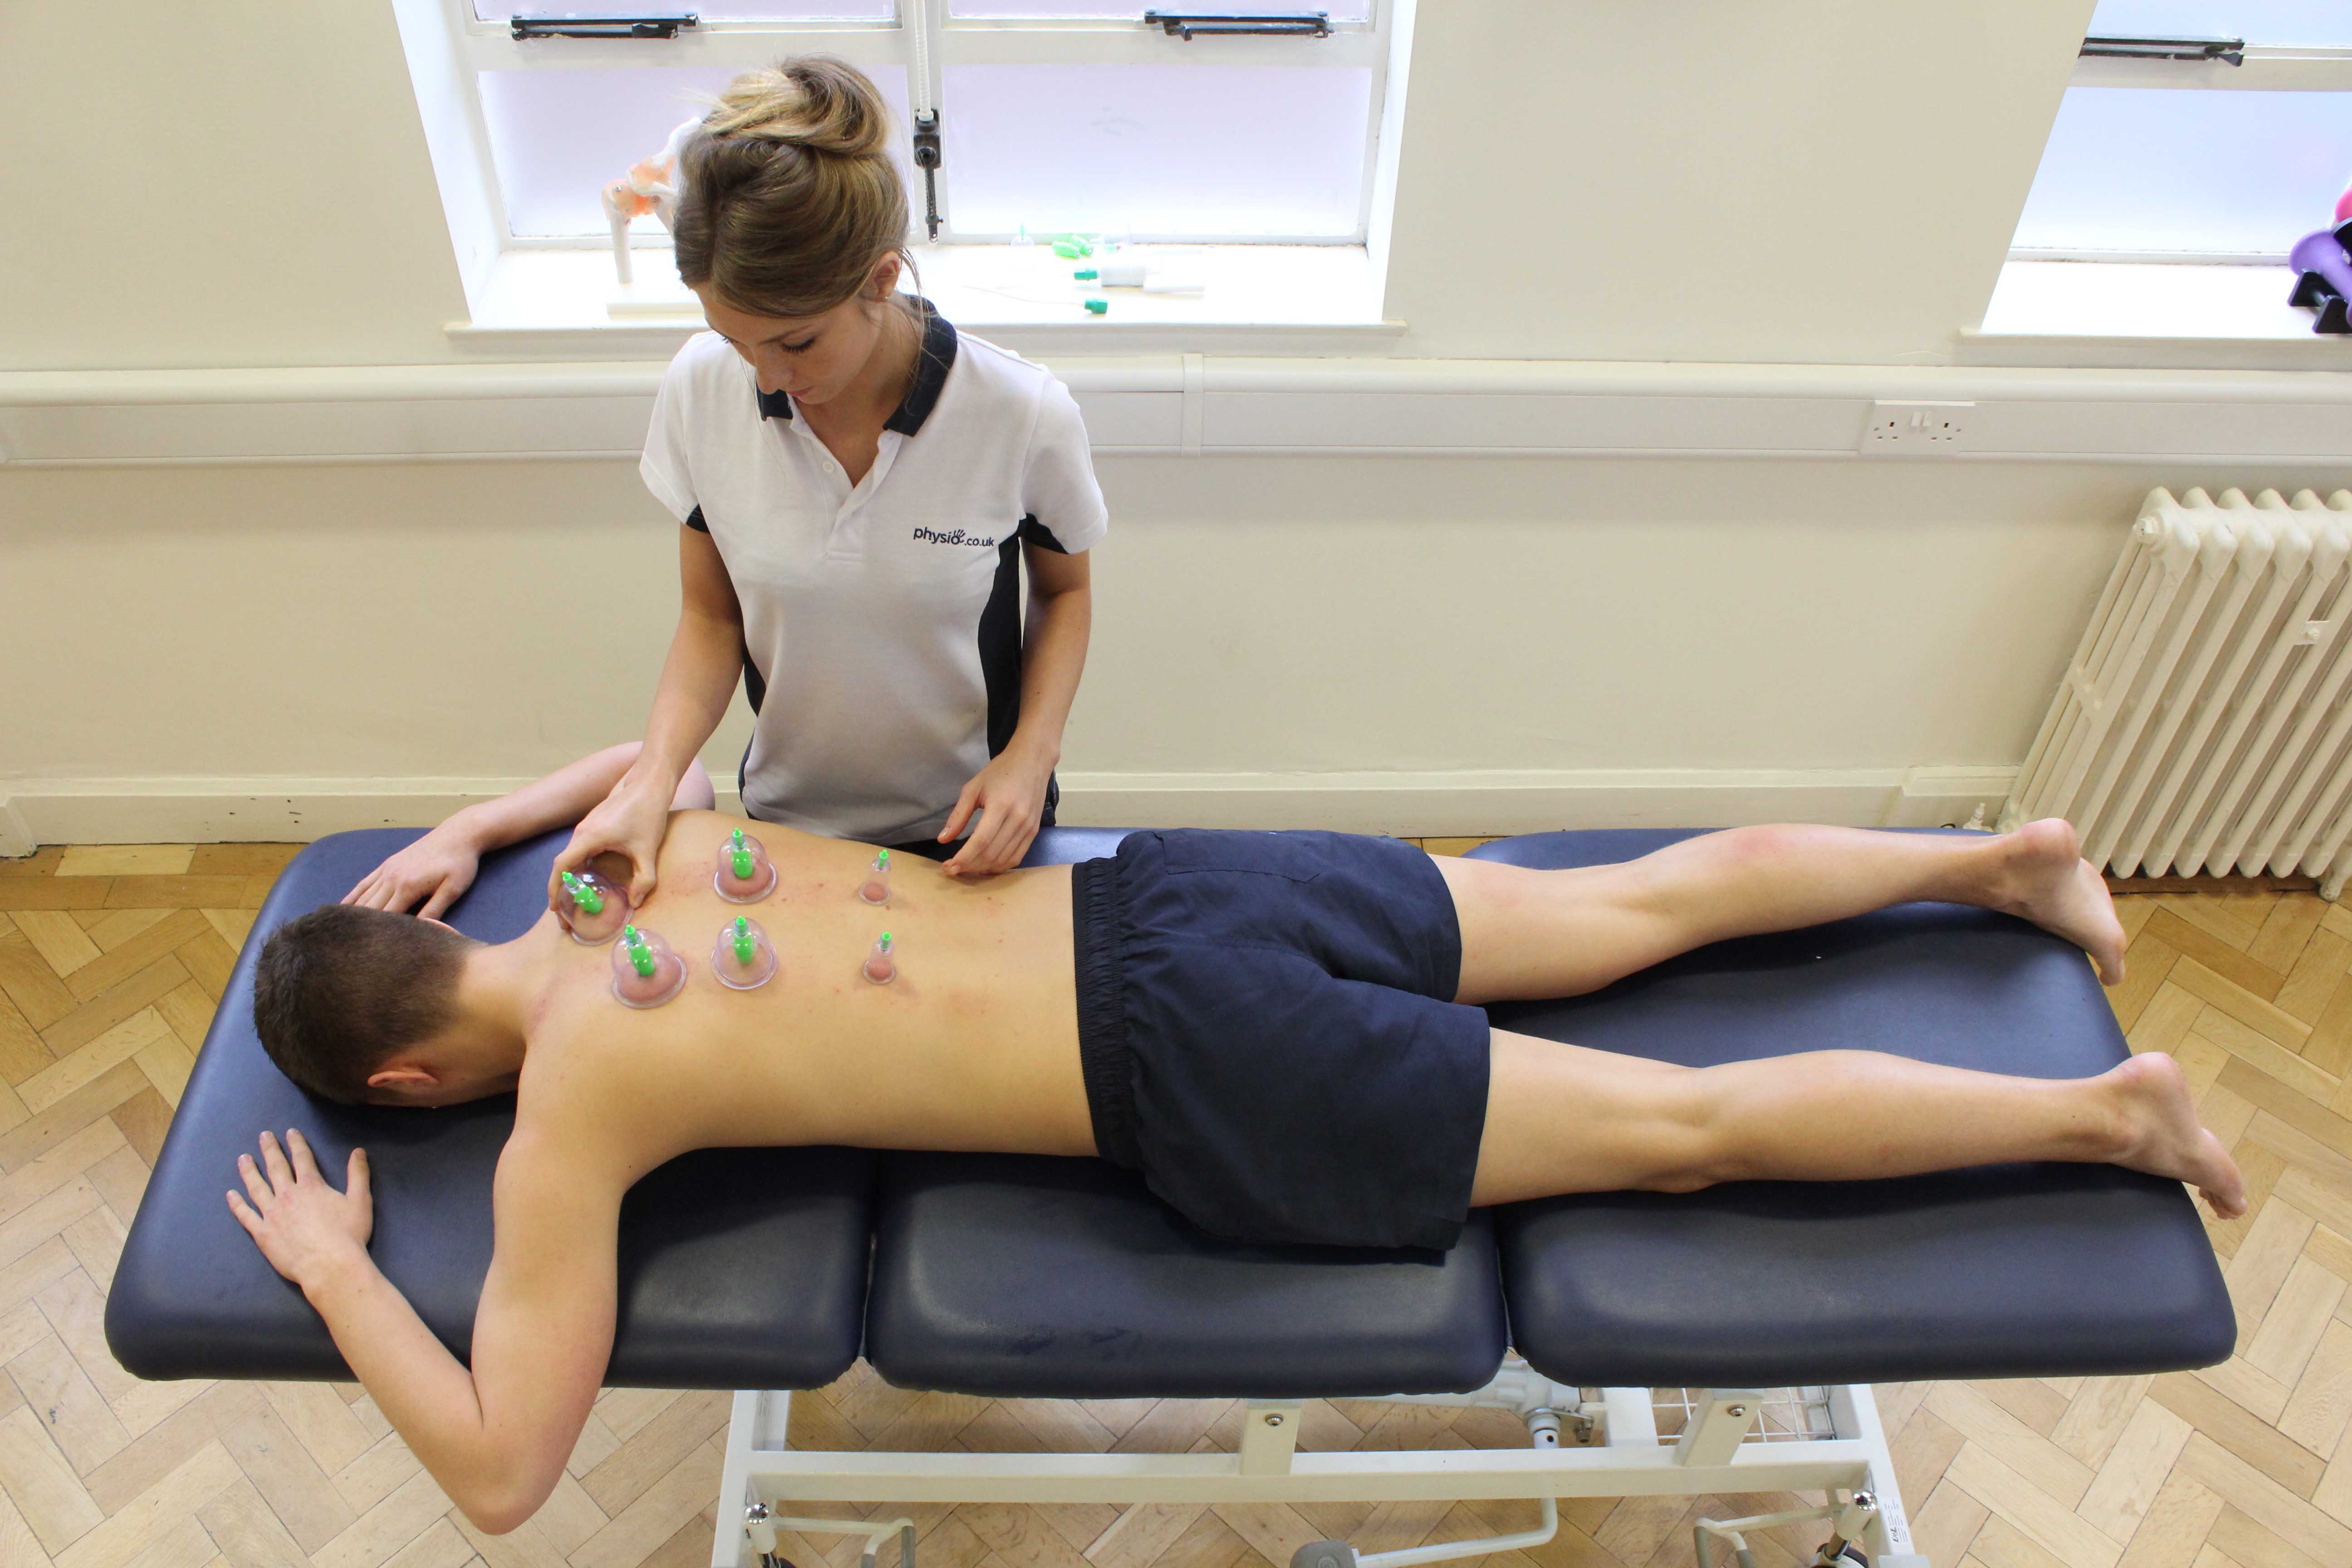 Physiotherapy treatment can provide you with a diagnosis and treatment plan to help you take control of pain.